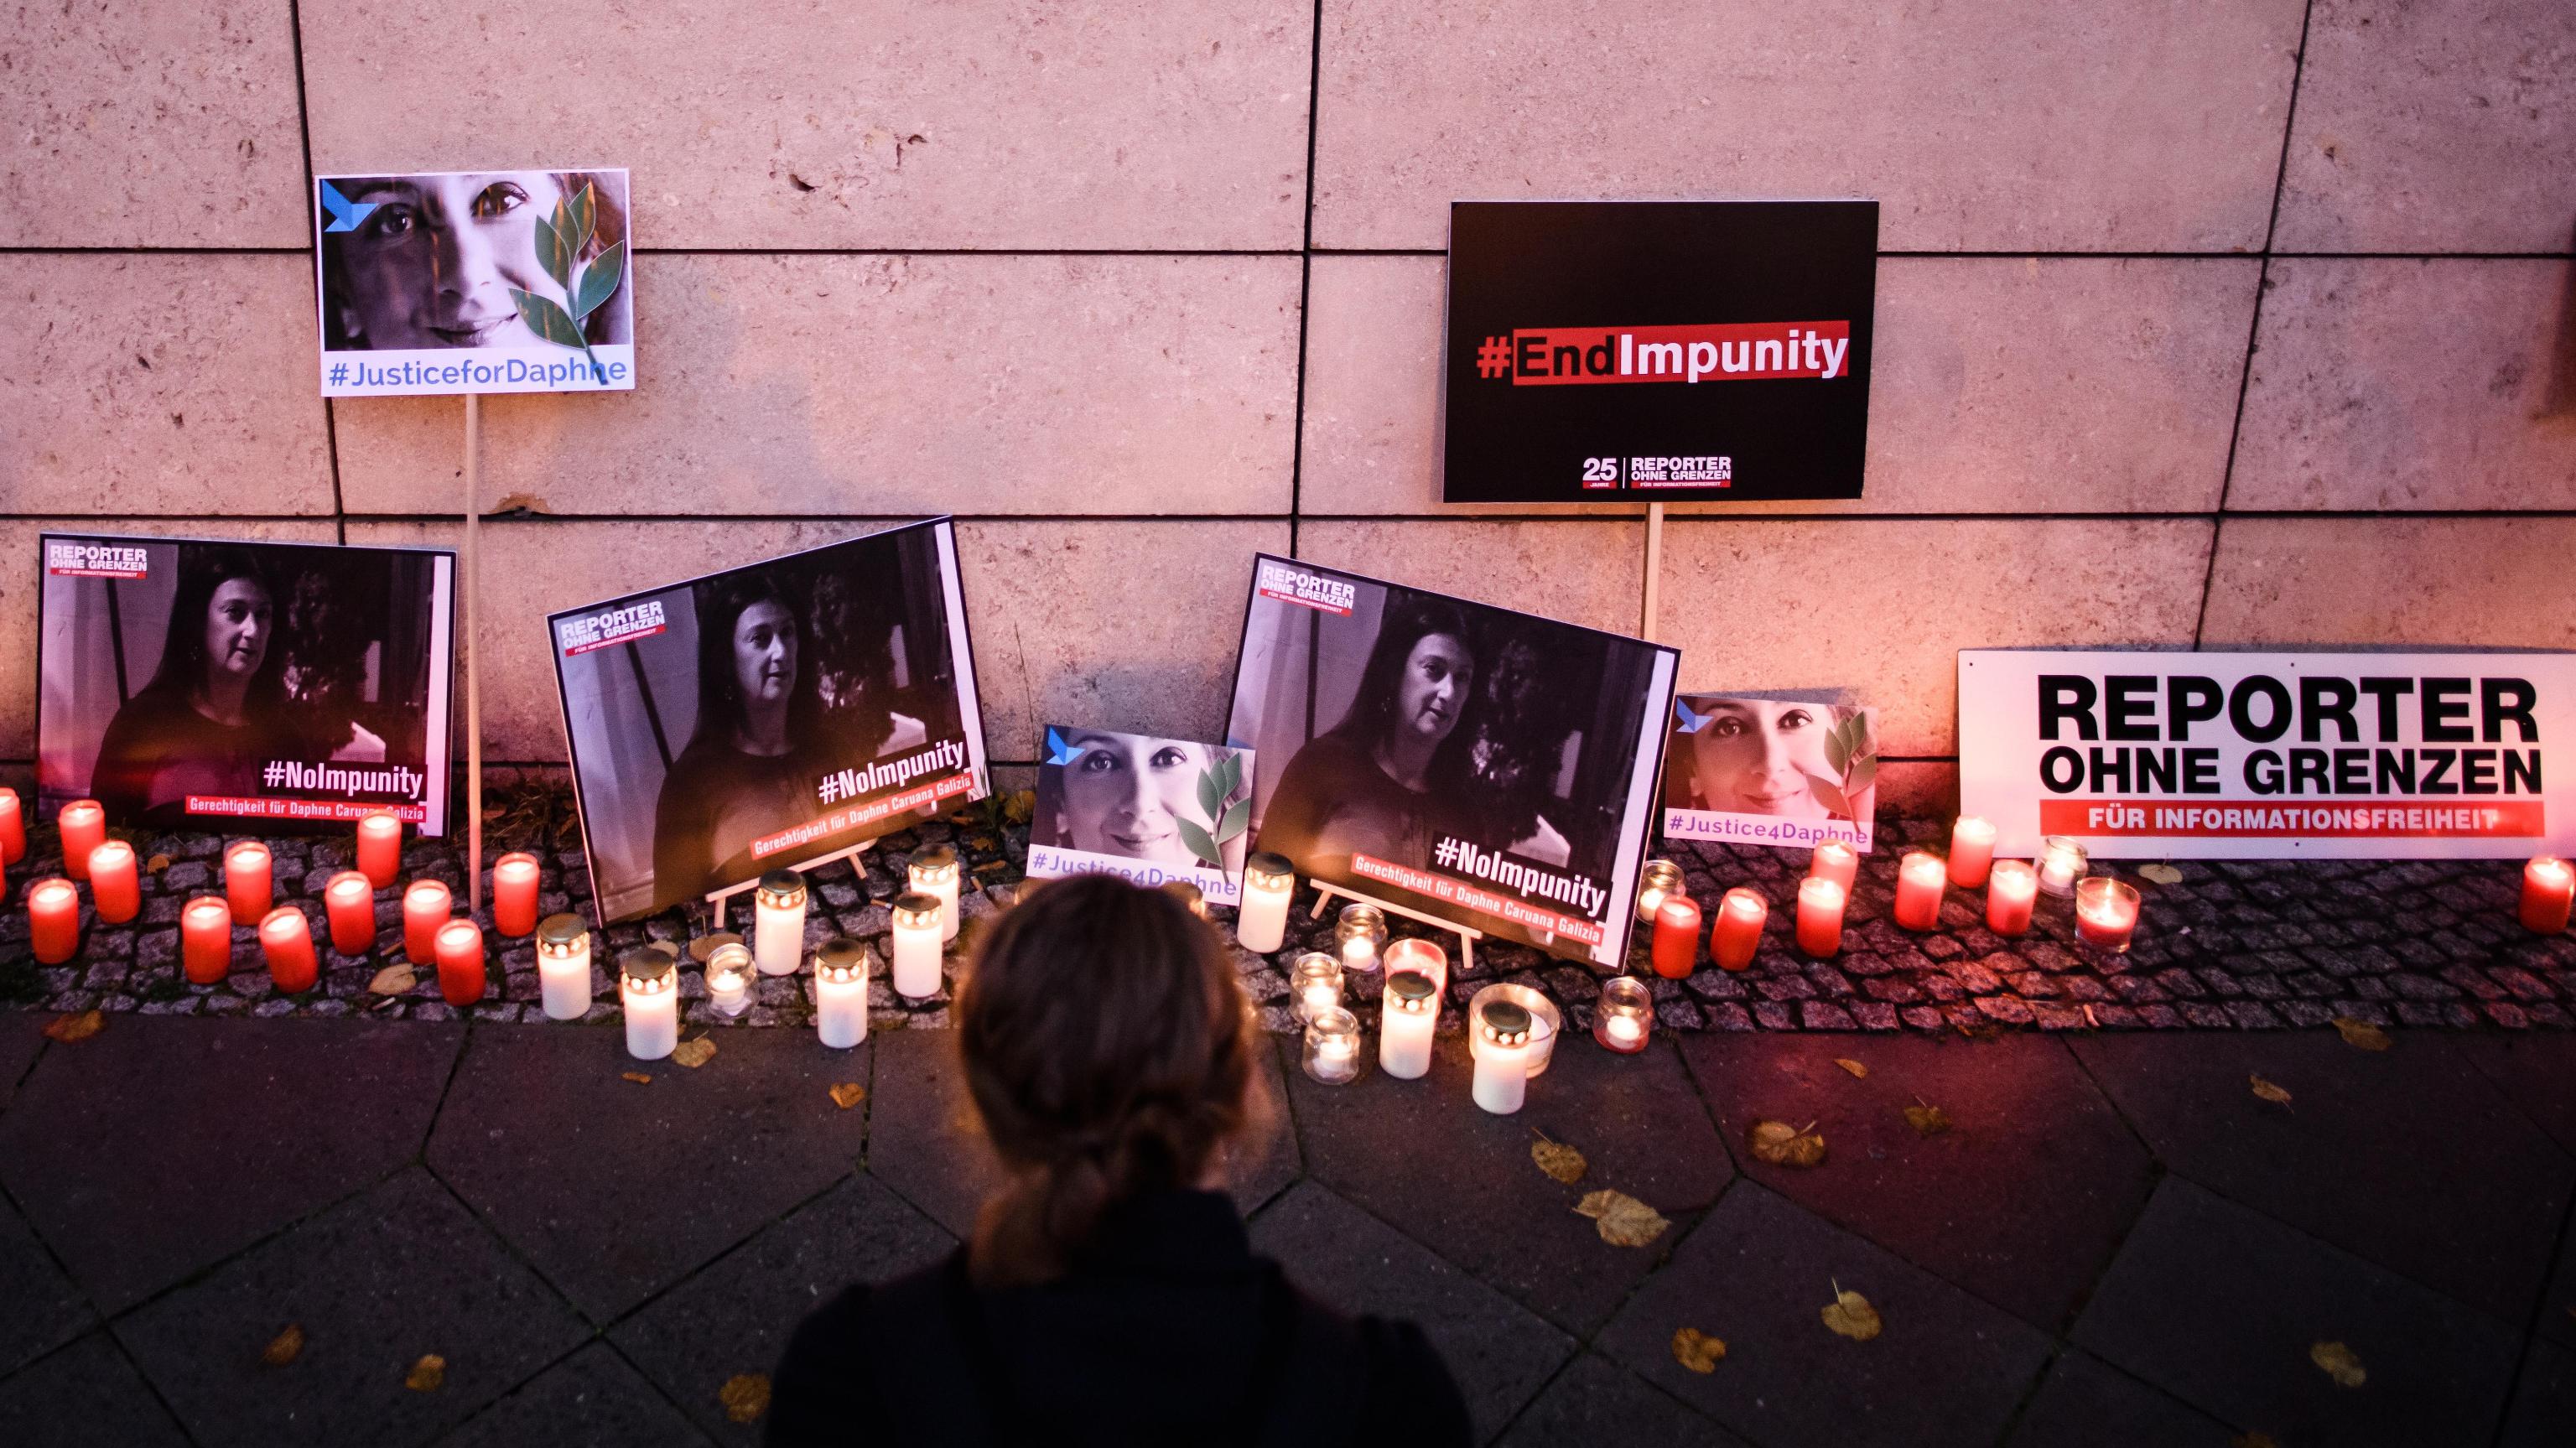 epa07925850 A woman kneels in front of candles and pictures during a picket in front of the Maltese embassy for murdered journalist Daphne Caruana Galizia in Berlin, Germany, 16 October 2019. Reporters Without Borders organized a picket for murdered journalist Daphne Caruana Galizia, who was killed on 16 October 2017 in Malta, while investigating the Panama Papers case.  EPA/CLEMENS BILAN